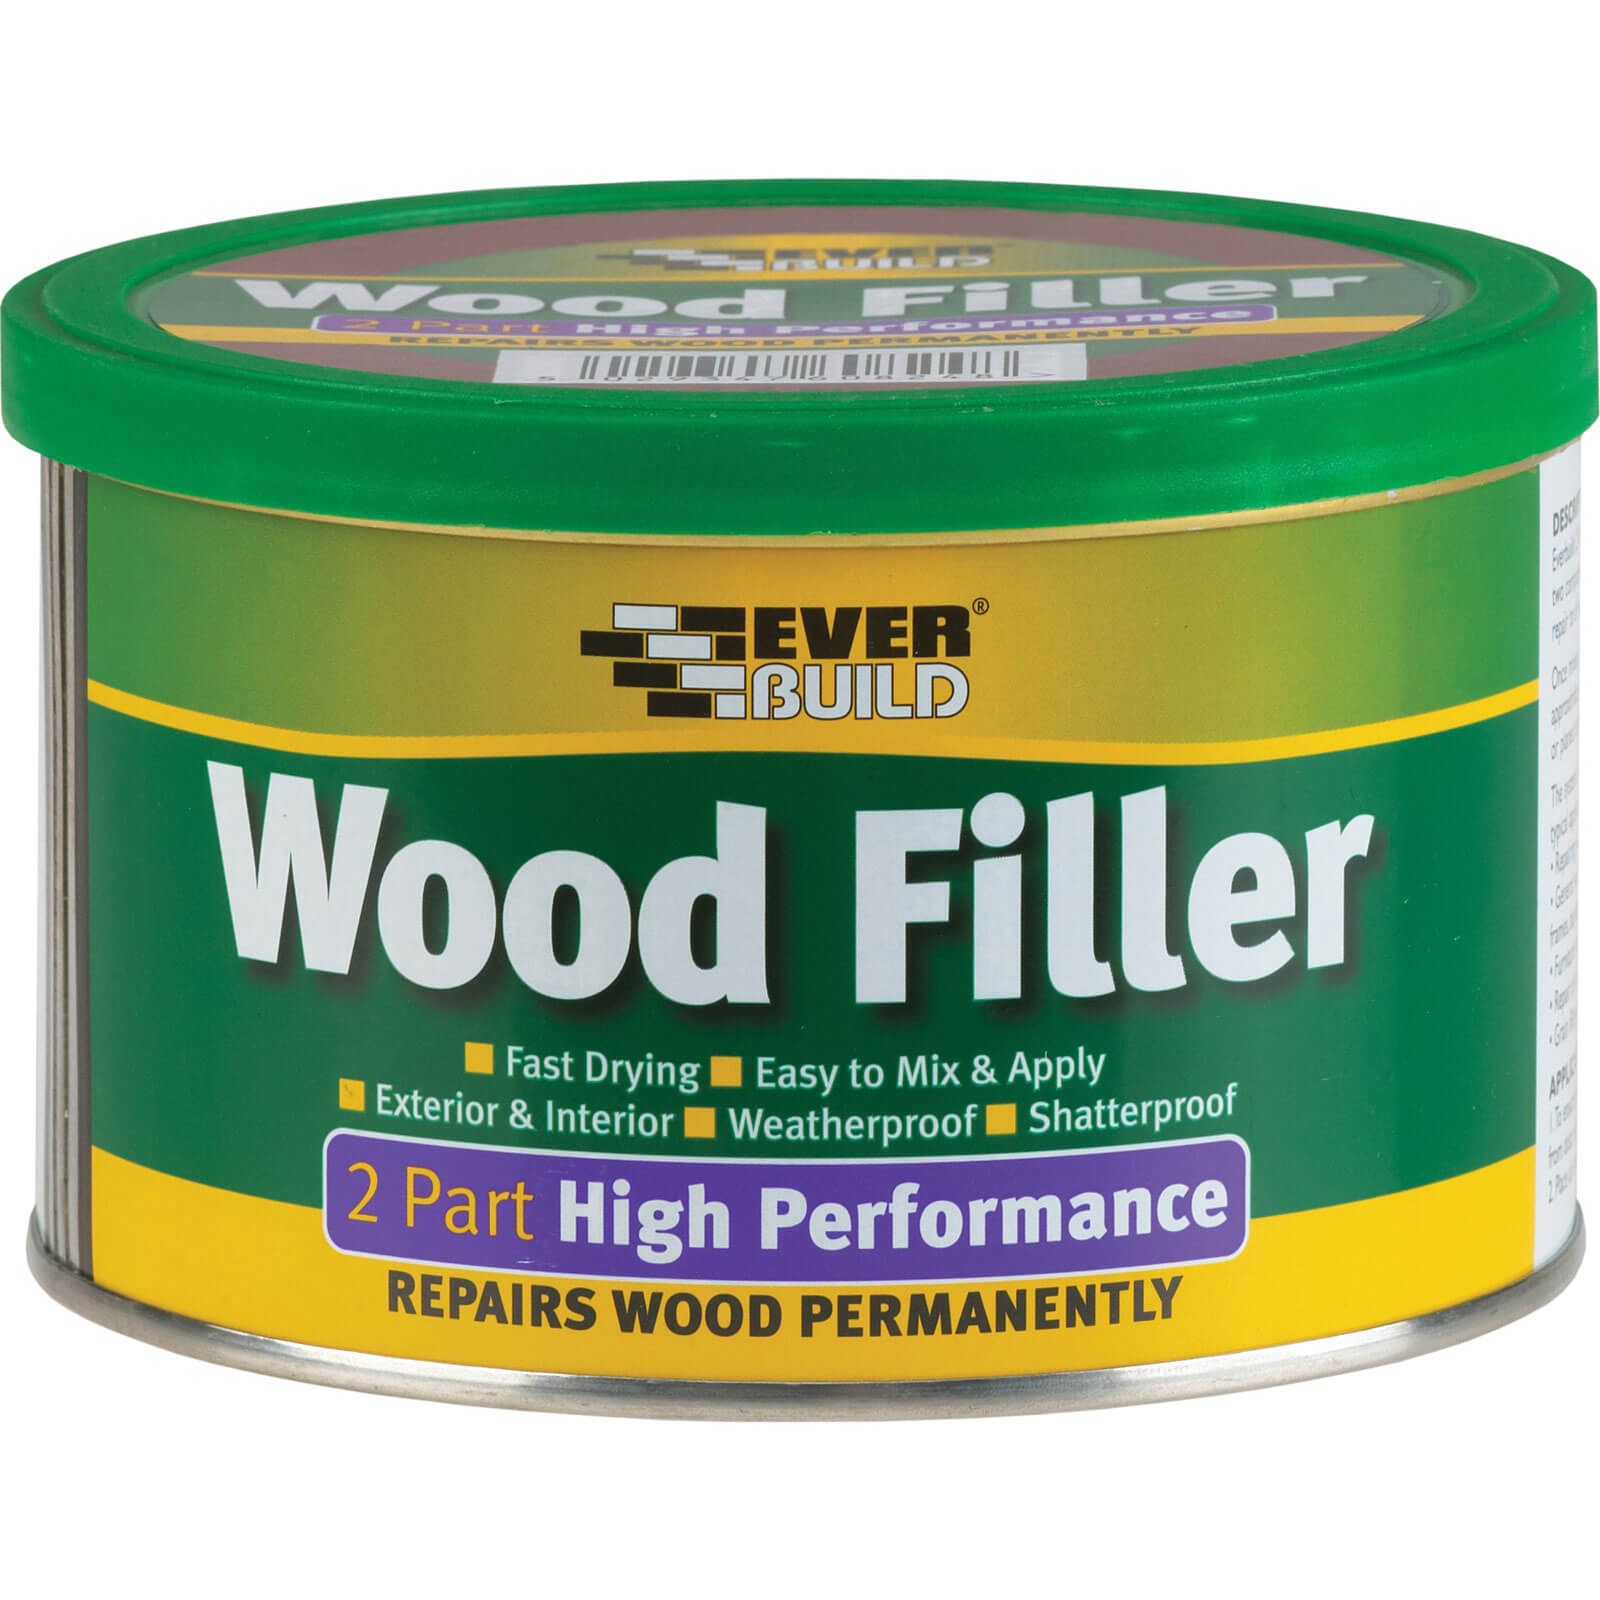 Photos - Sealant / Adhesive Everbuild 2 Part High Performance Wood Filler Light Stainable 1400g EVBHPW 